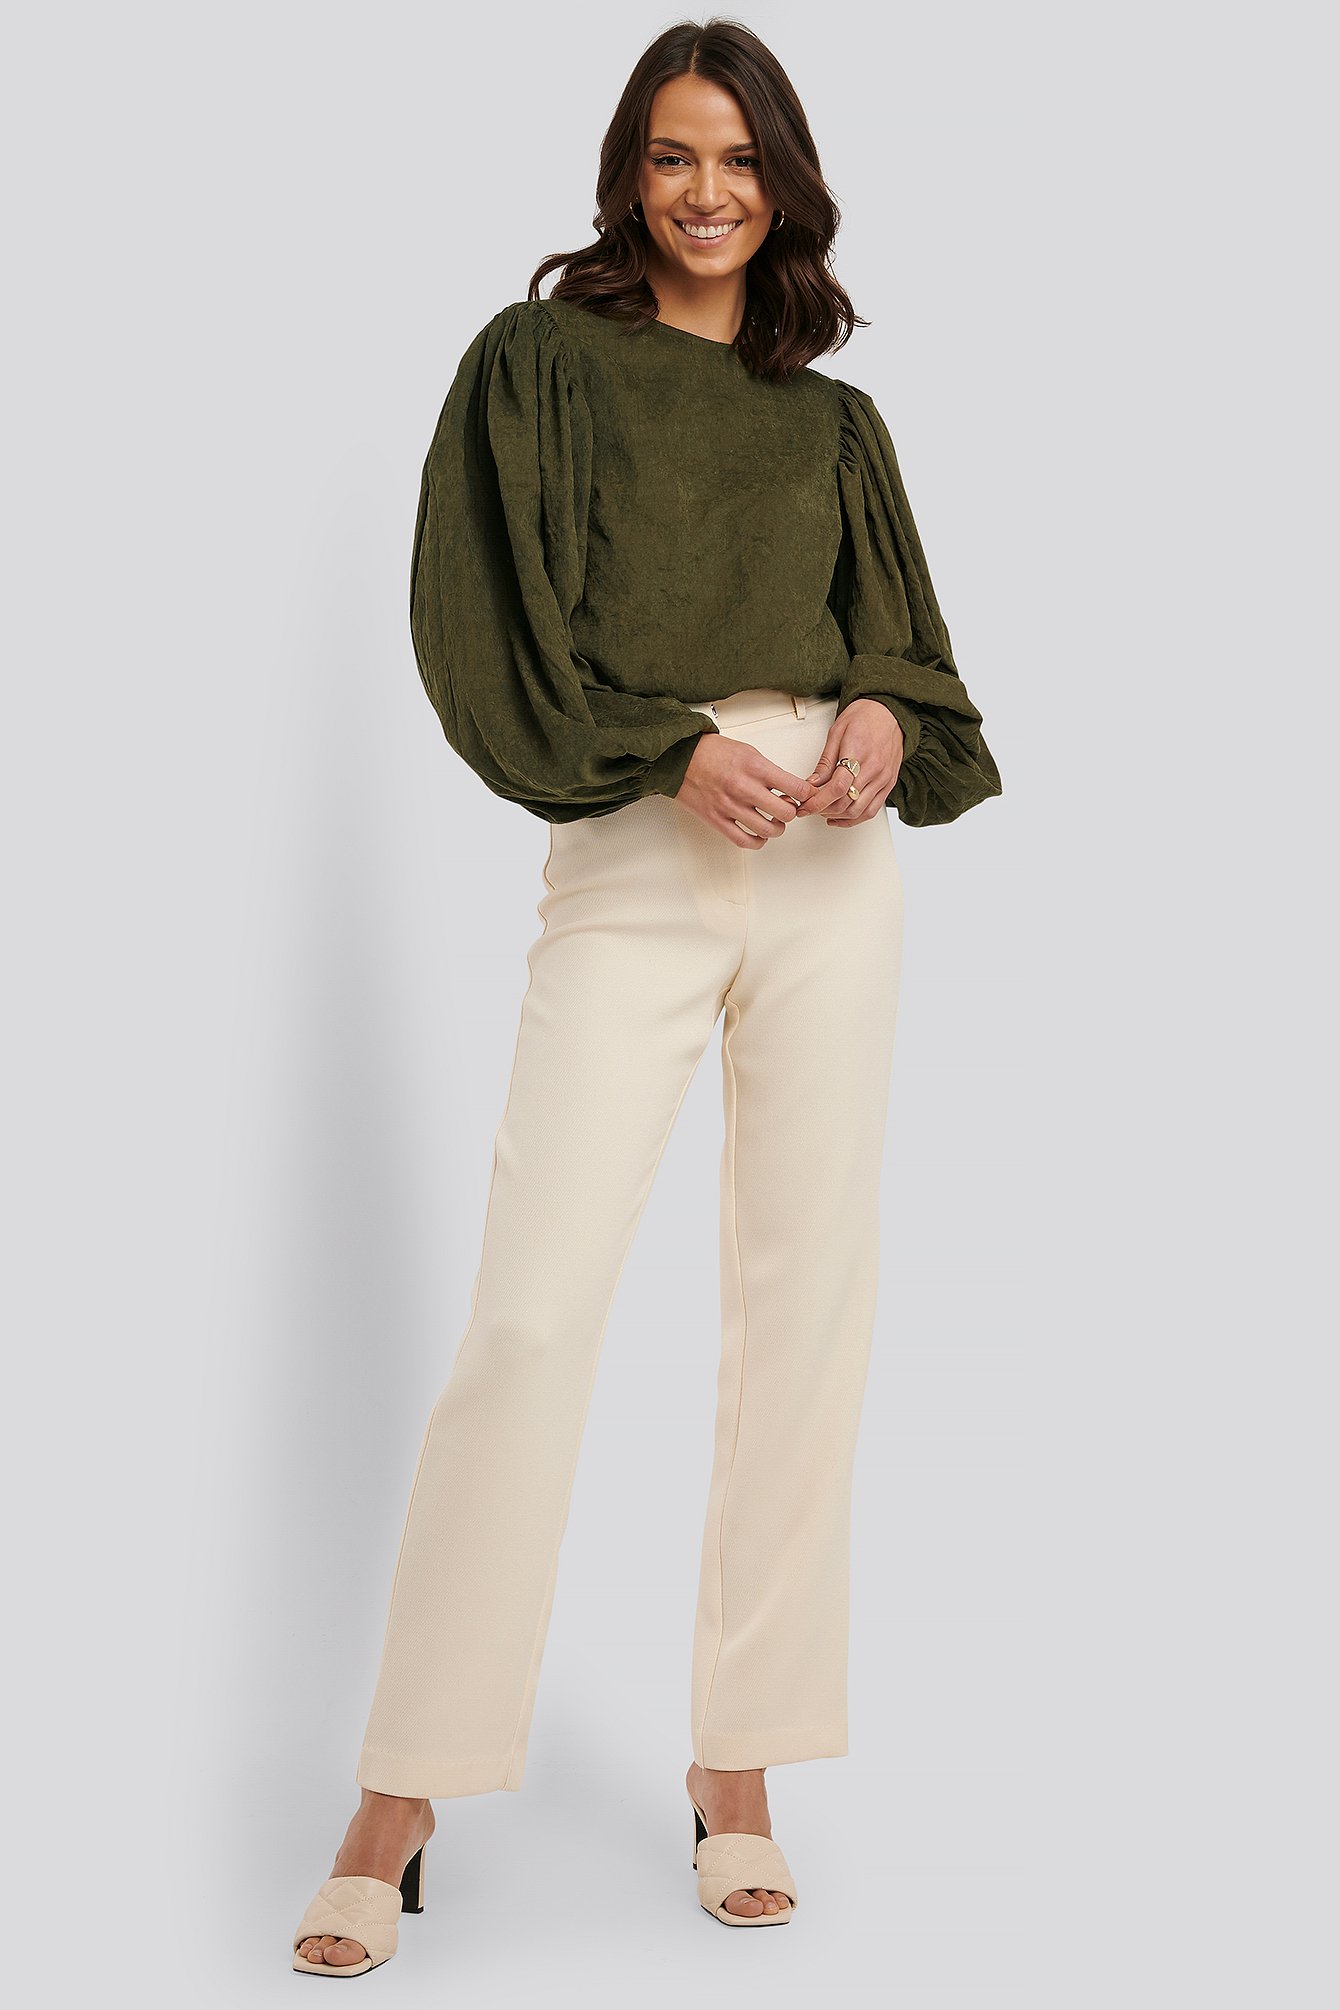 Puff Sleeve Round Neck Top Outfit.